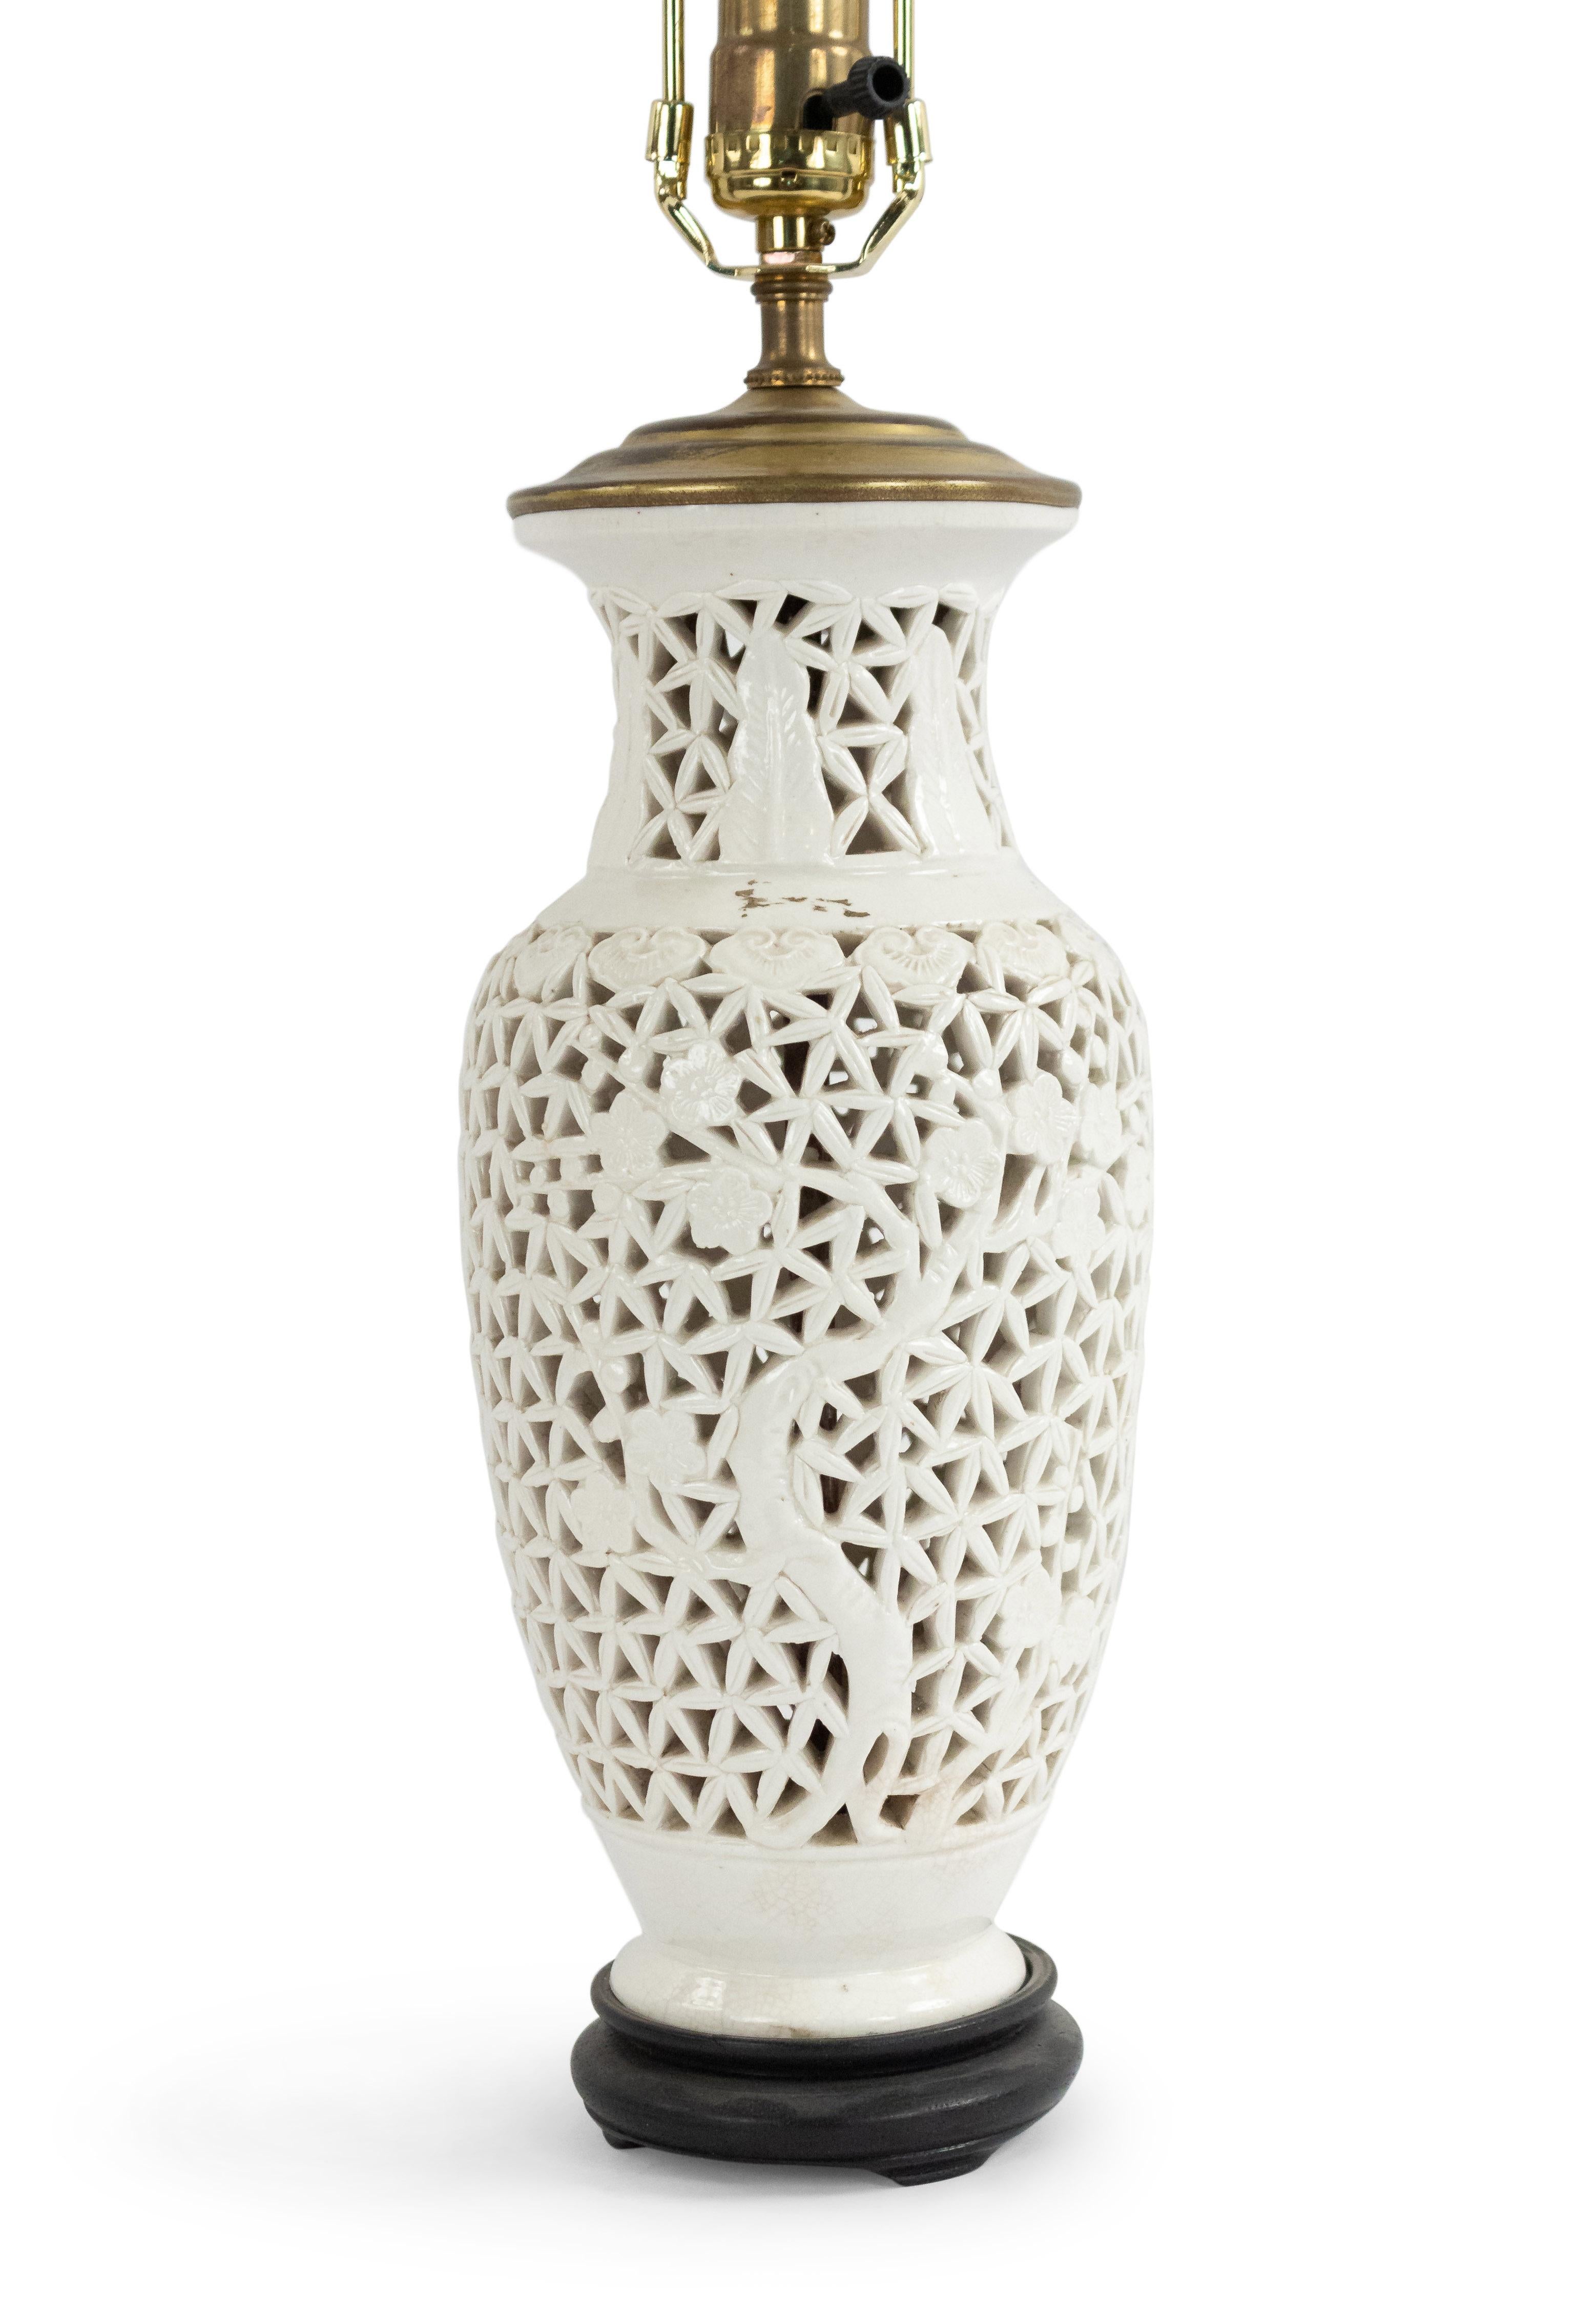 Asian Chinese-style white filigree porcelain table lamp with floral design and black round base.